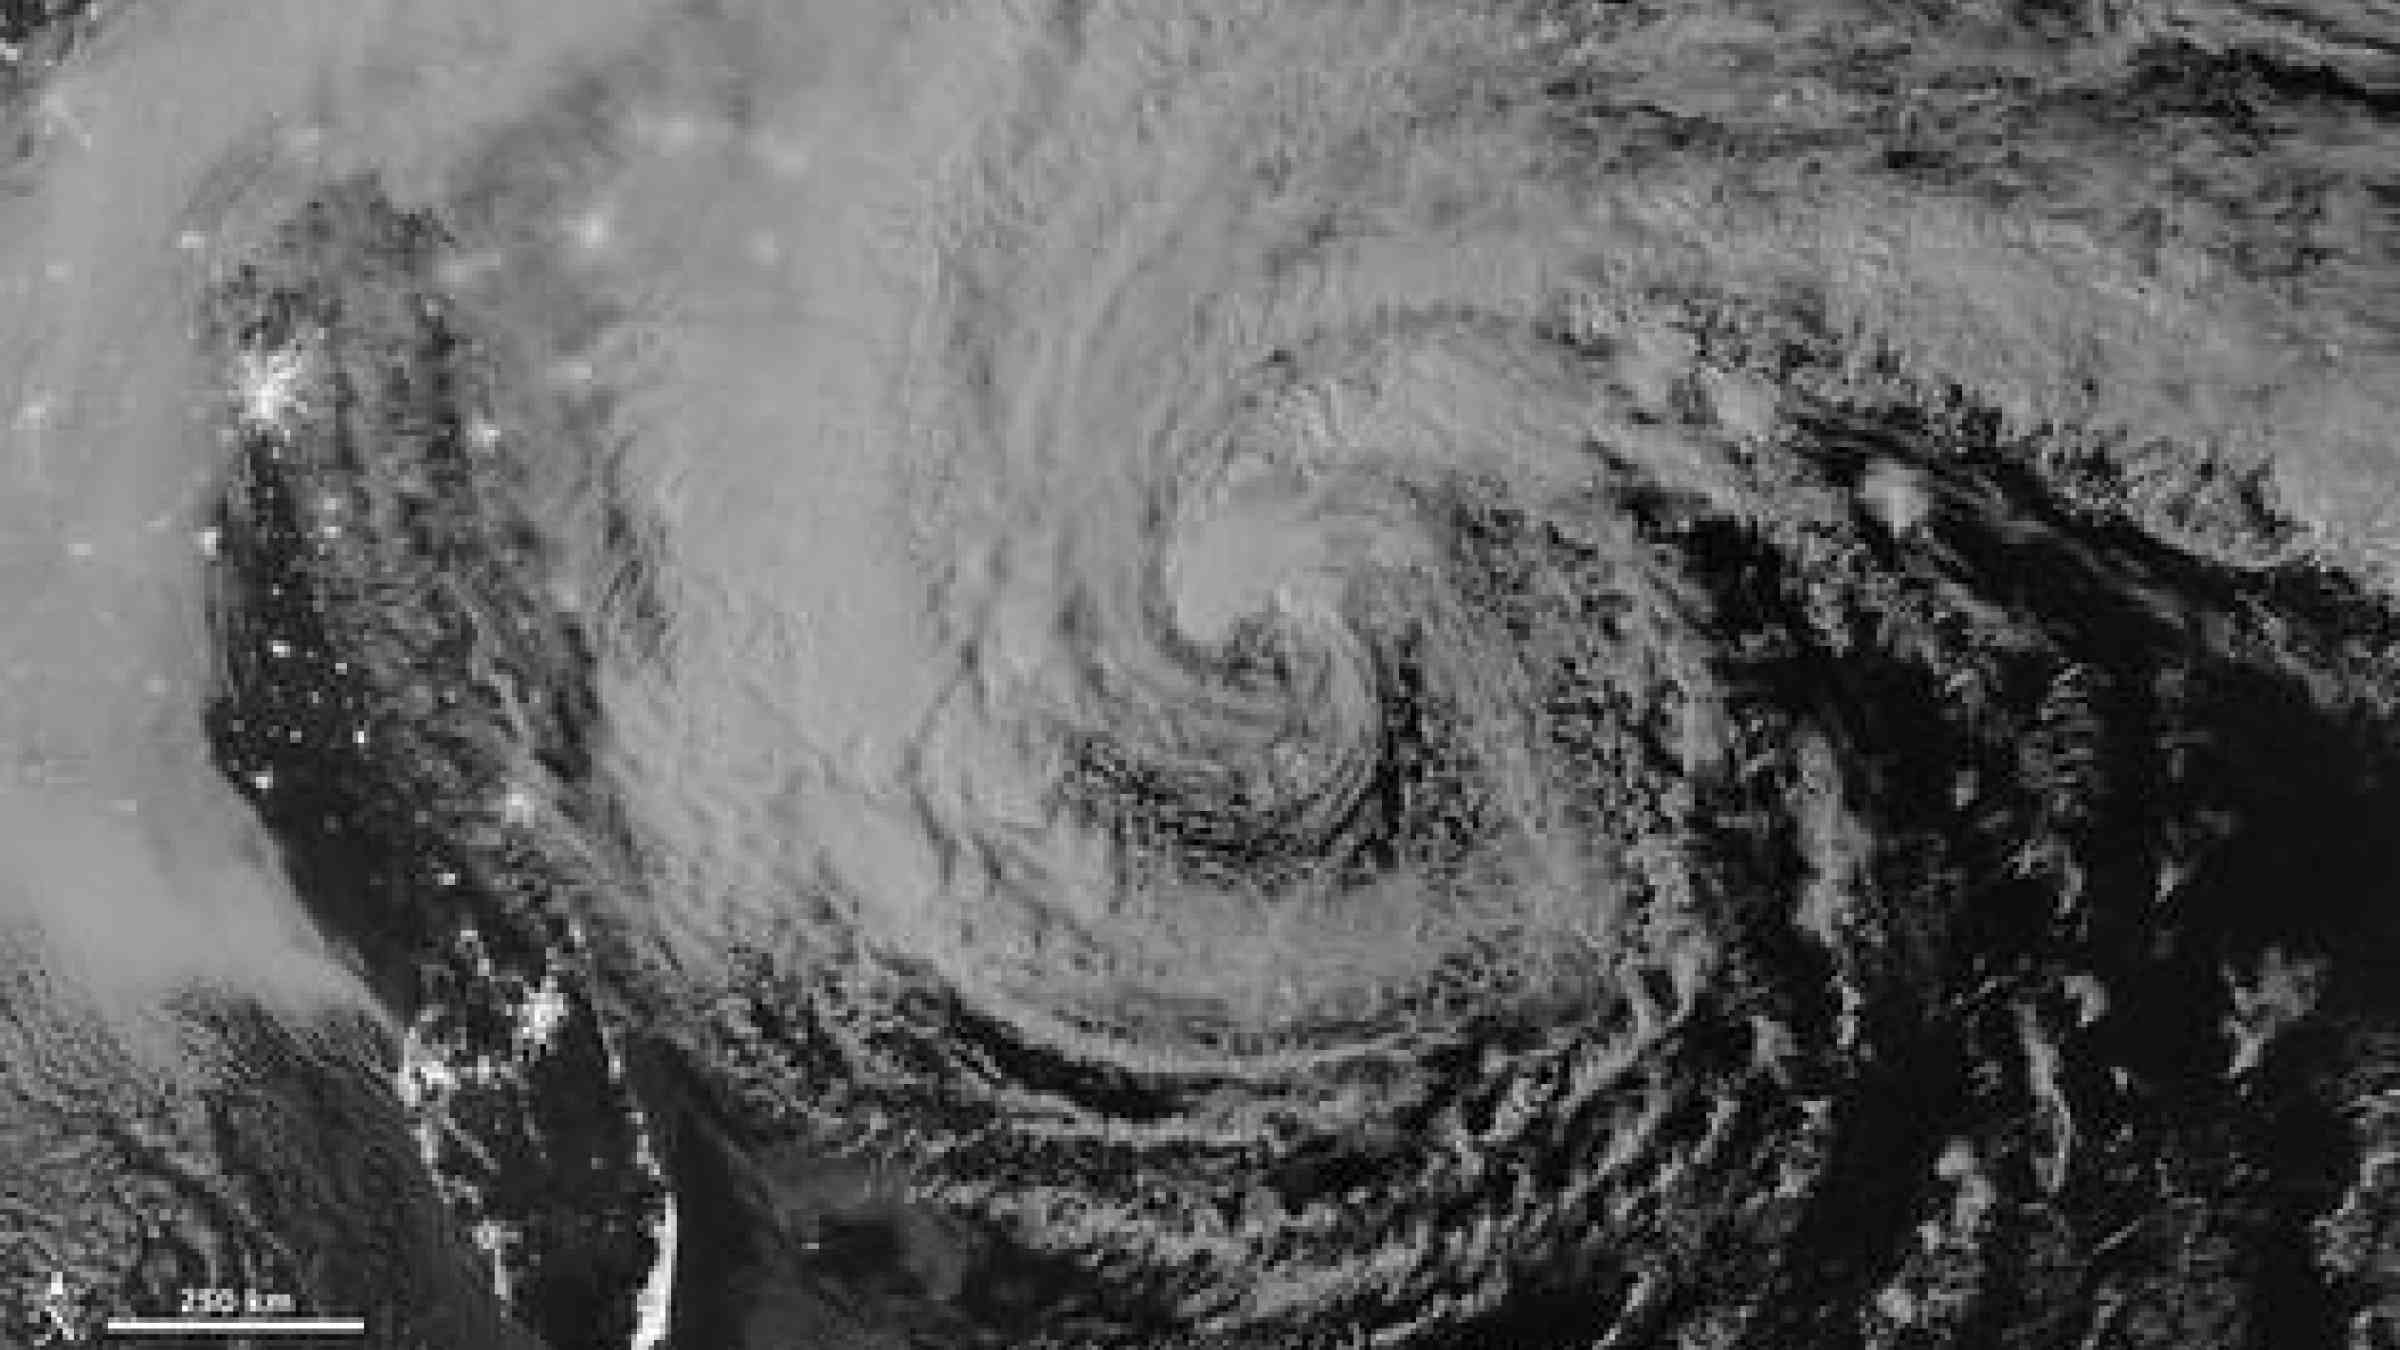 This image of Hurricane Sandy was acquired by the Visible Infrared Imaging Radiometer Suite (VIIRS) on the Suomi NPP satellite at 2:42 a.m. Eastern Daylight Time (06:42 Universal Time) on October 28, 2012.